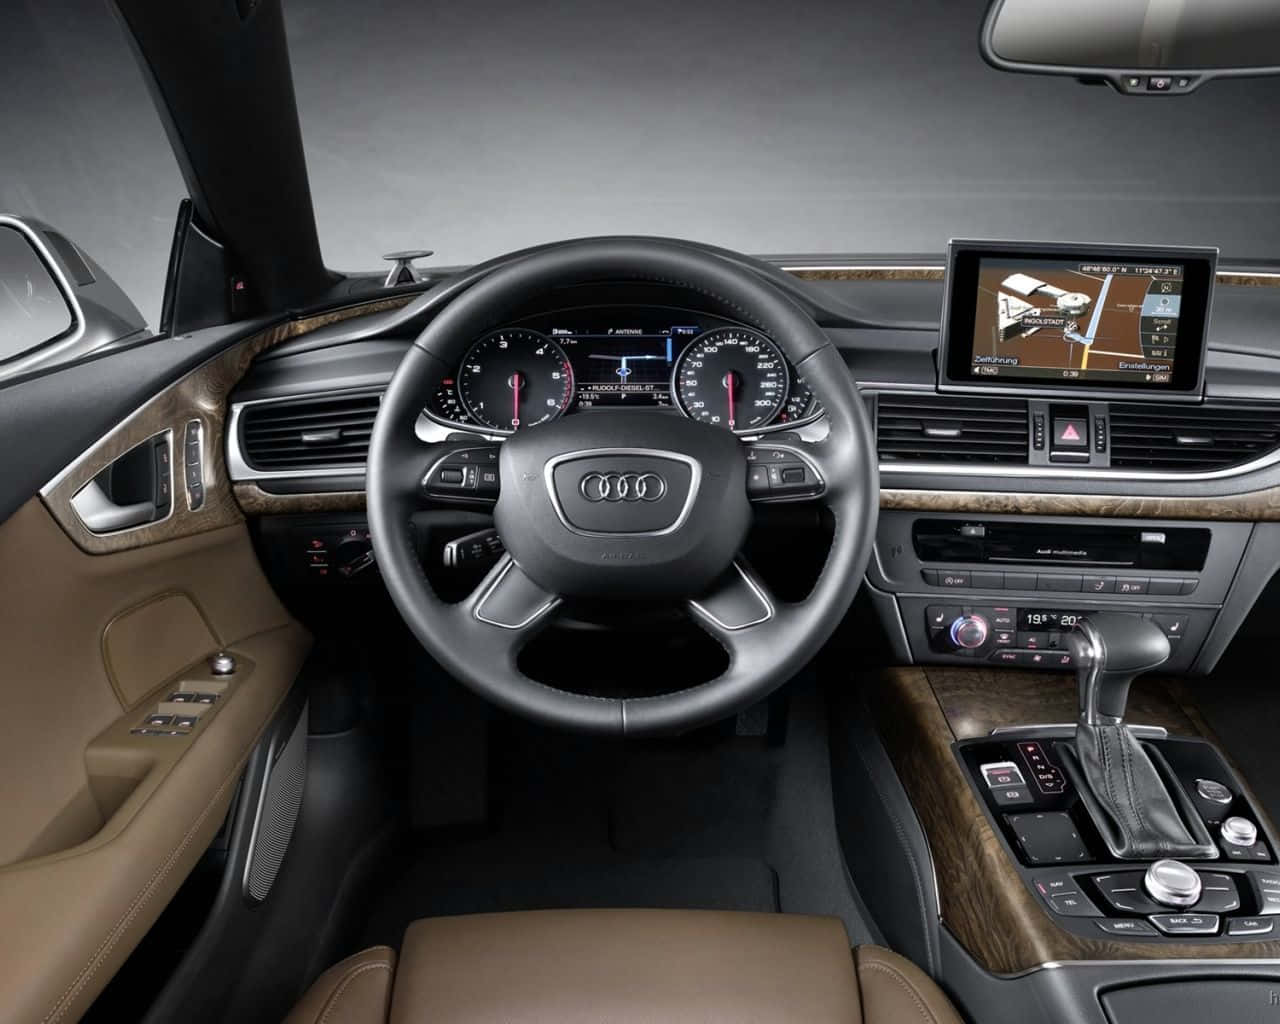 The Interior Of The Audi S6